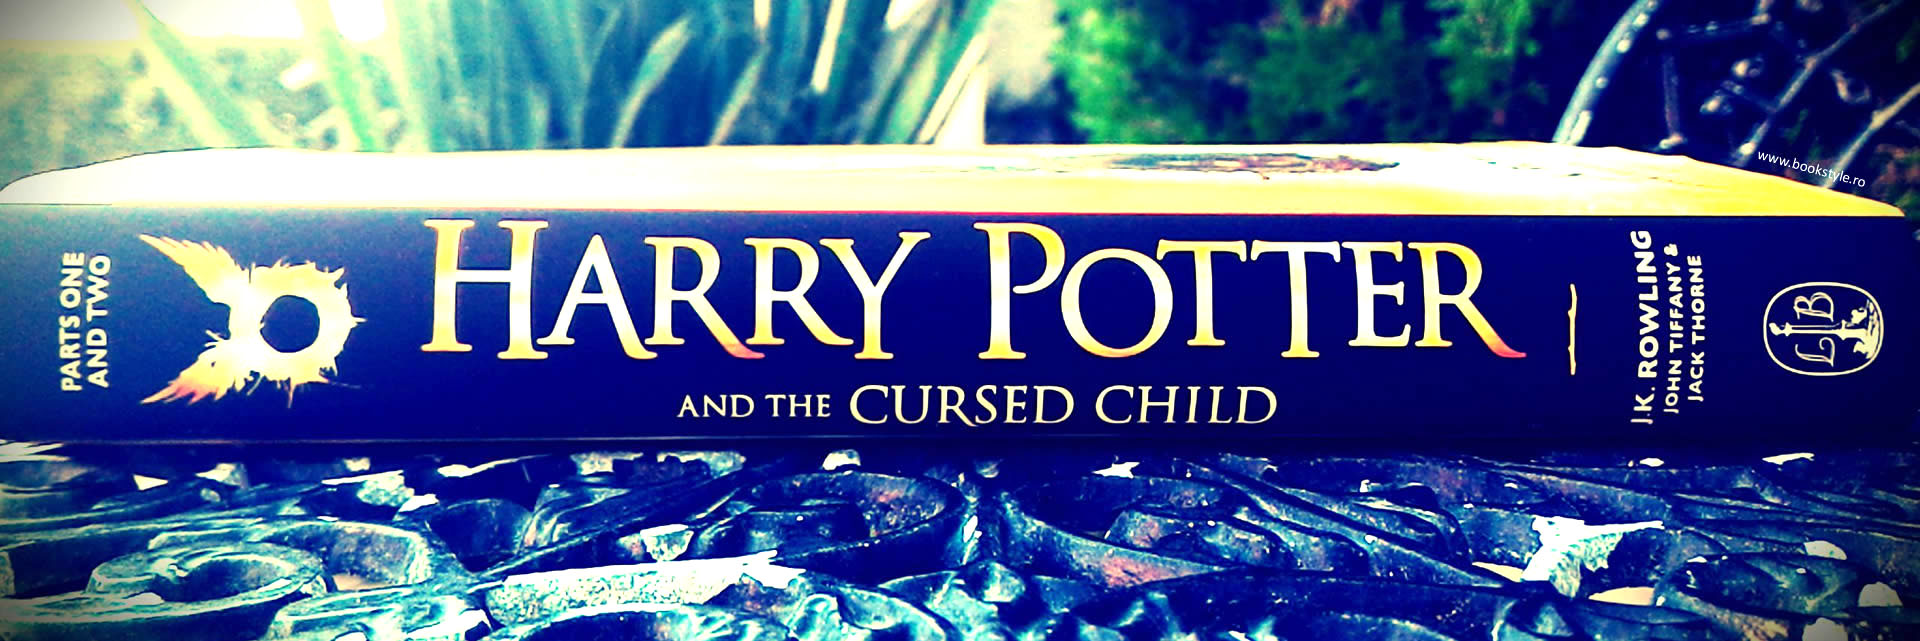 Harry Potter and the Cursed Child. ISBN 9780751565355